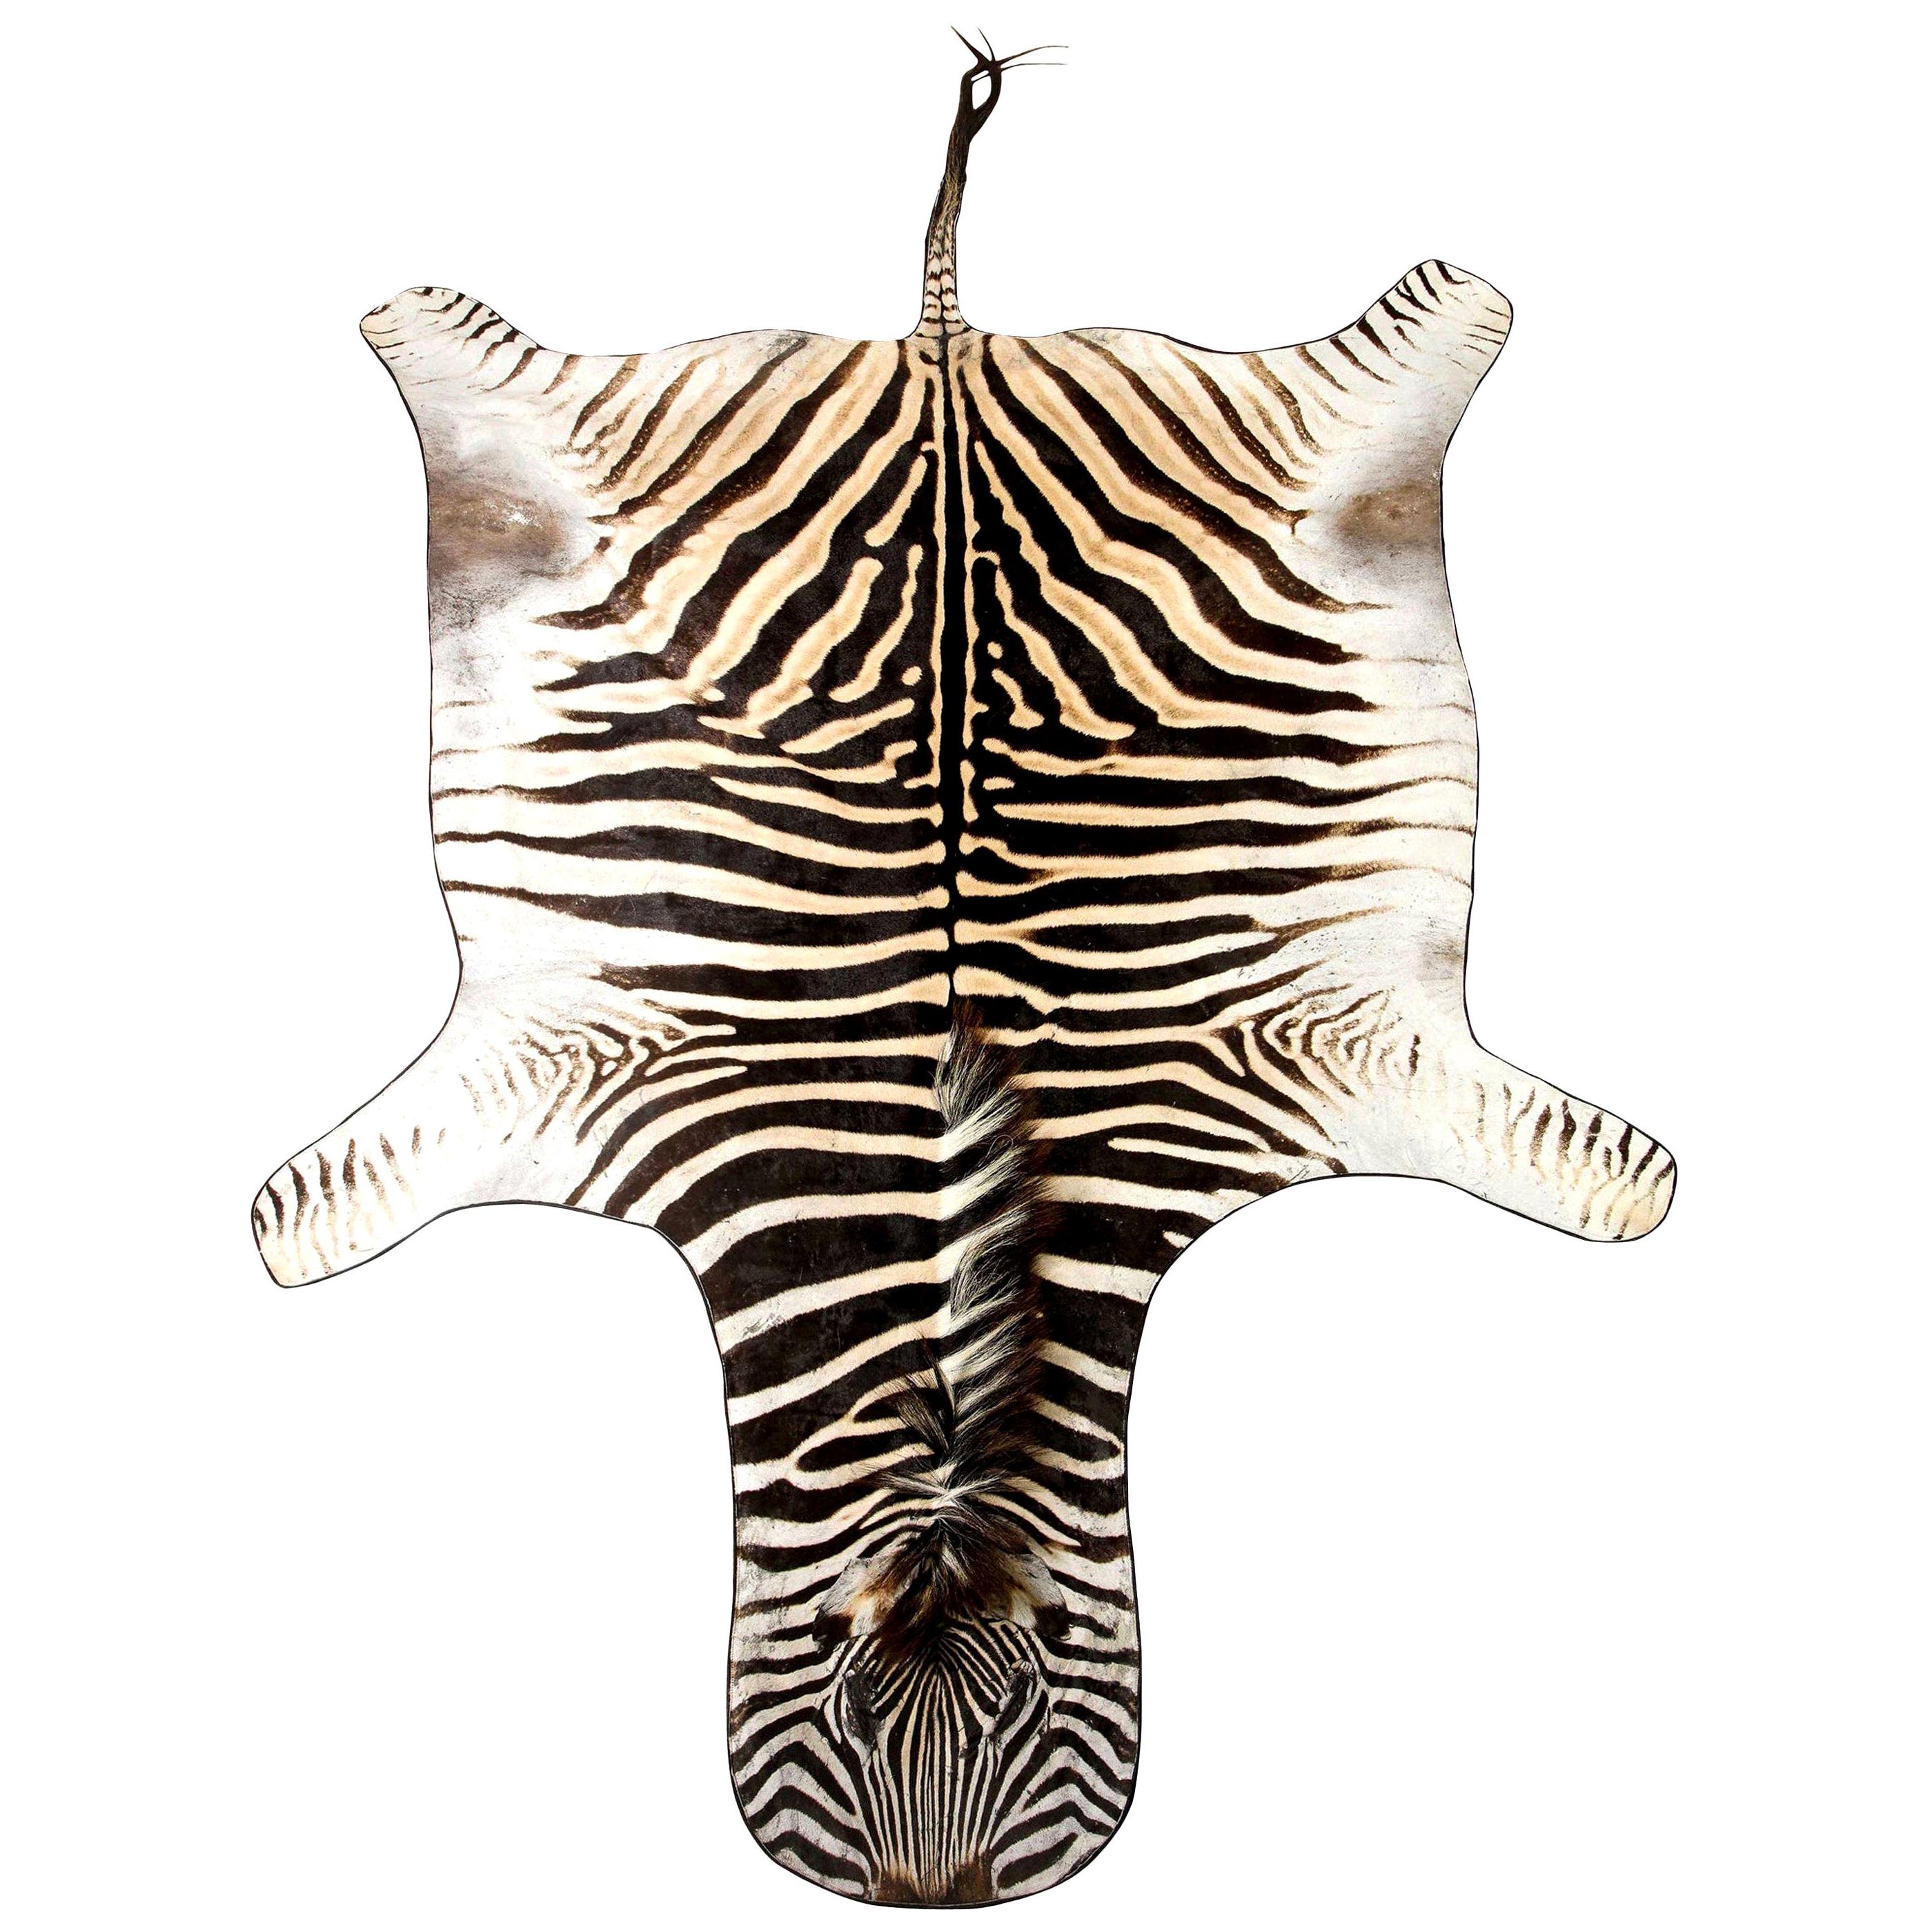 Zebra Rug, South Africa, Wool Felt Backed with Leather Trim, In Stock, New Hide